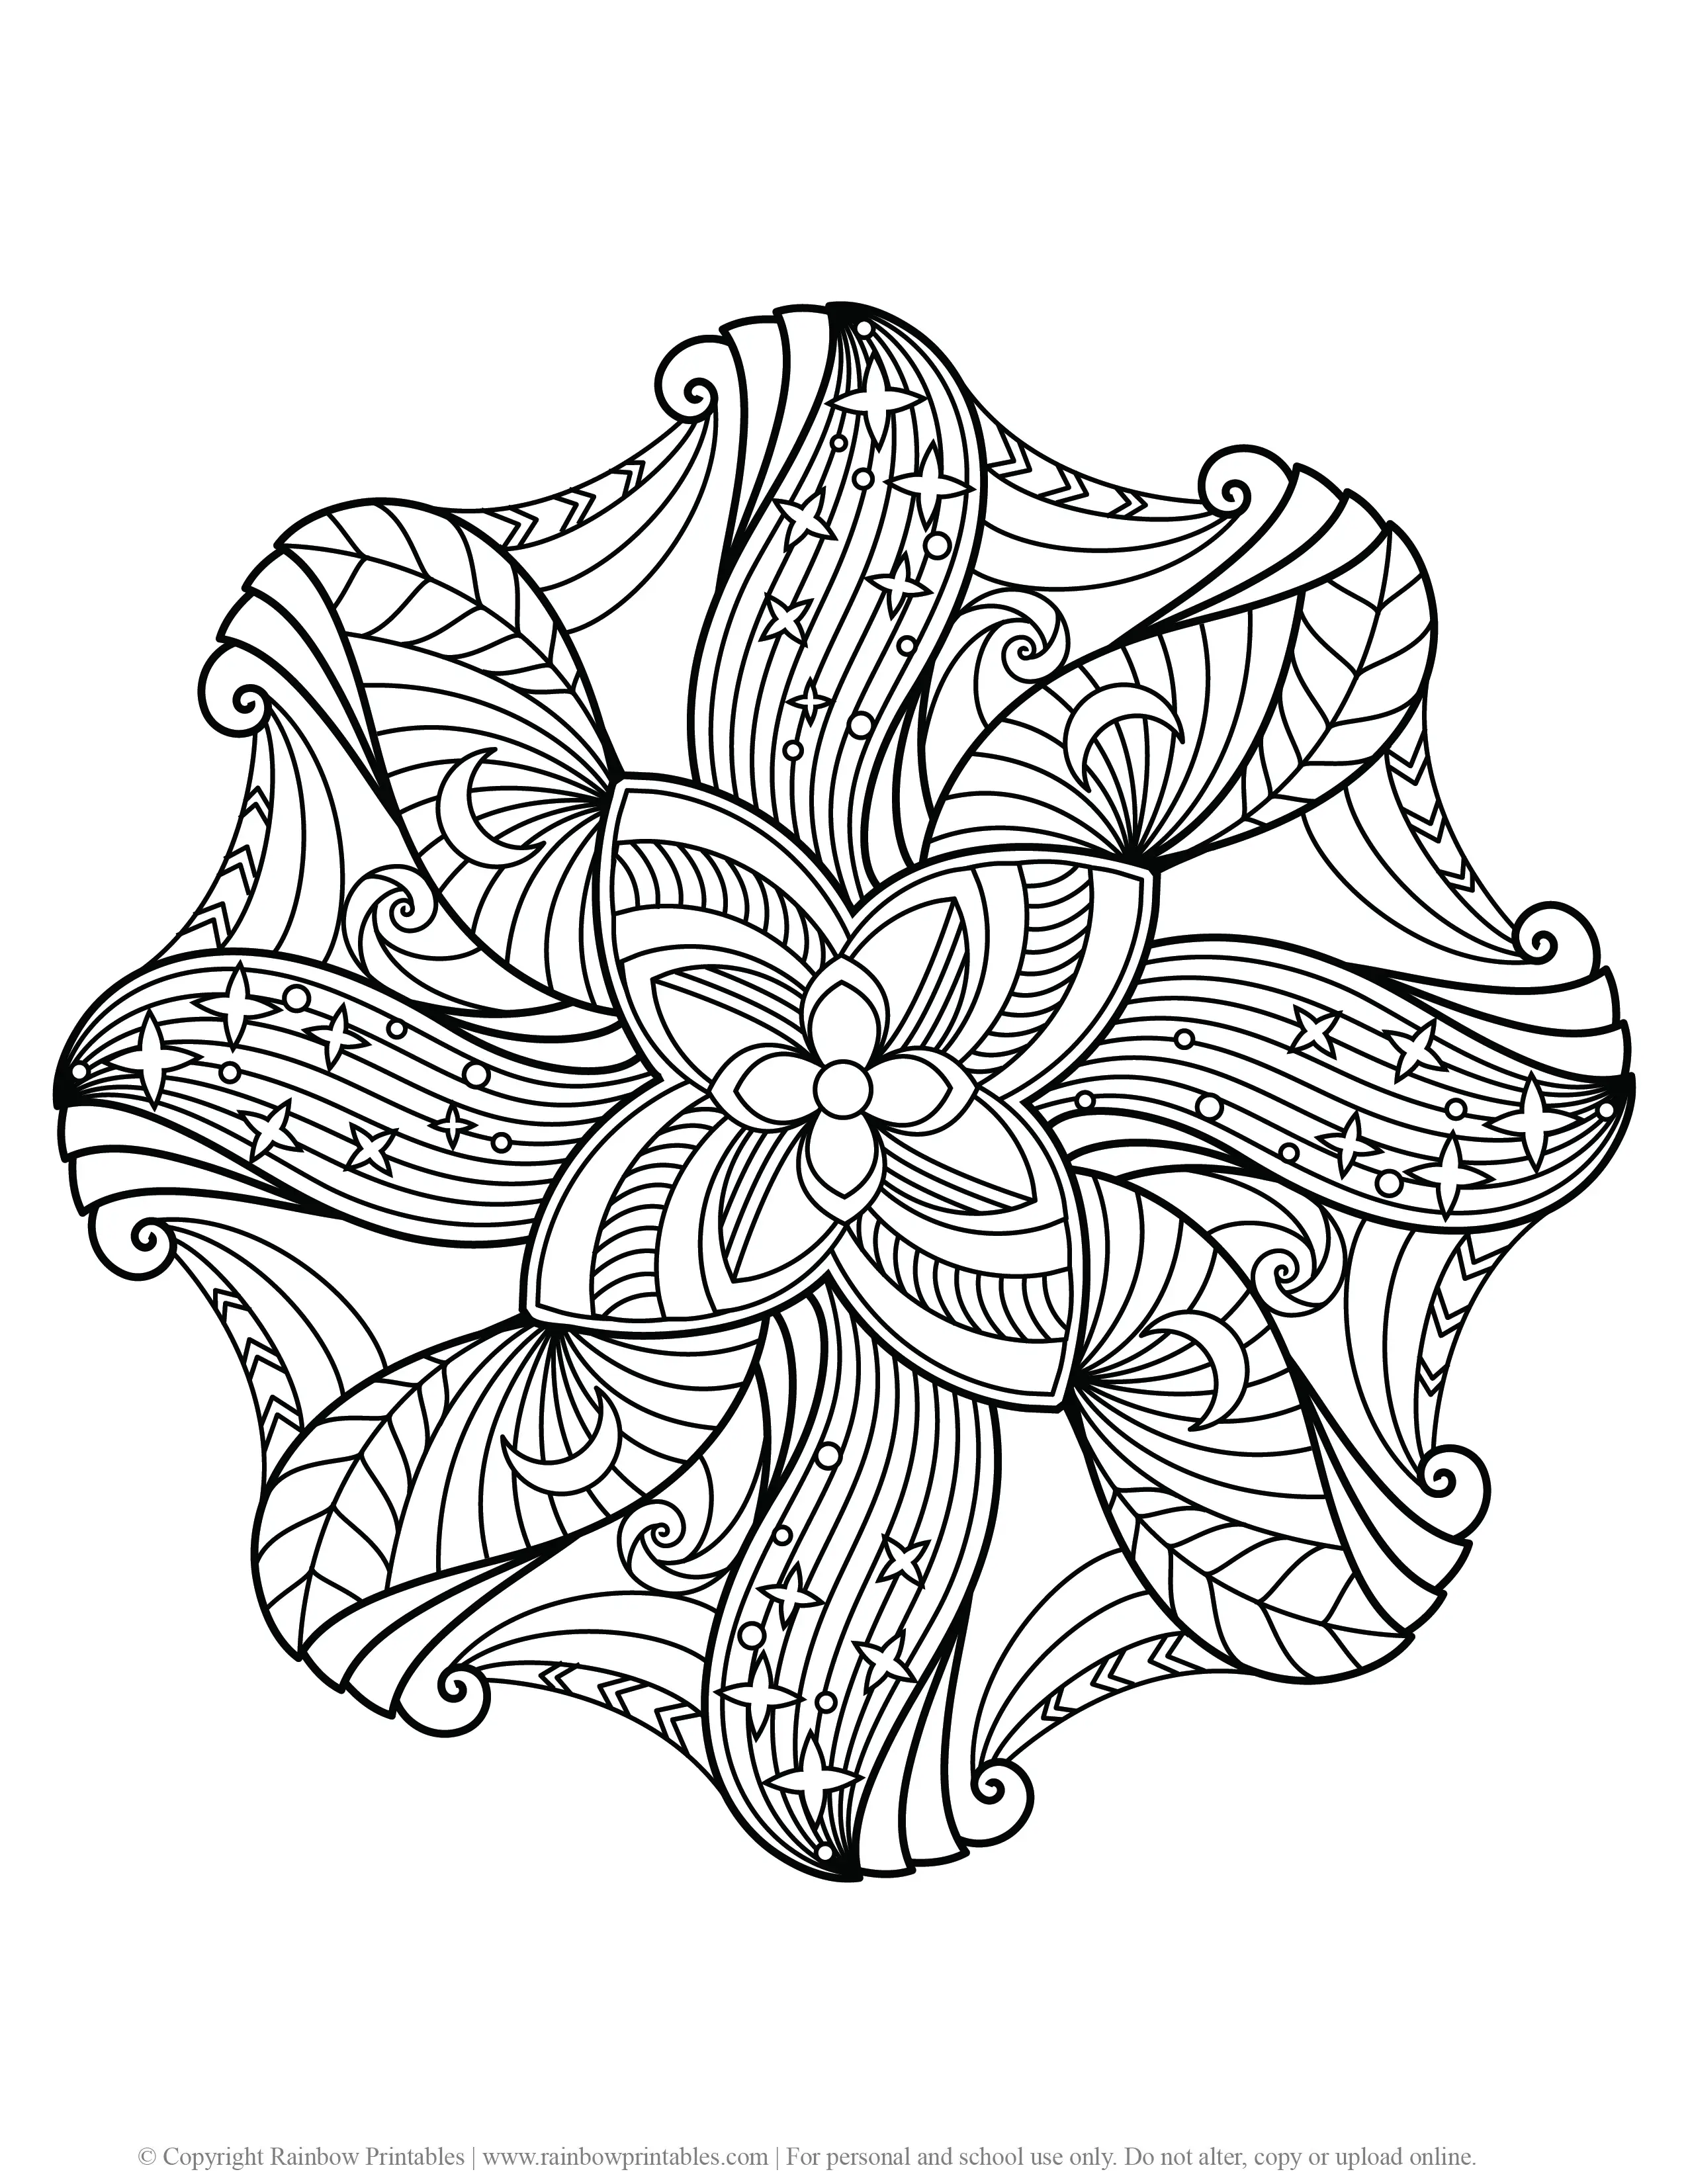 FLOWER MANDALA COLORING PAGES FOR ADULTS AND KIDS PRINTABLE